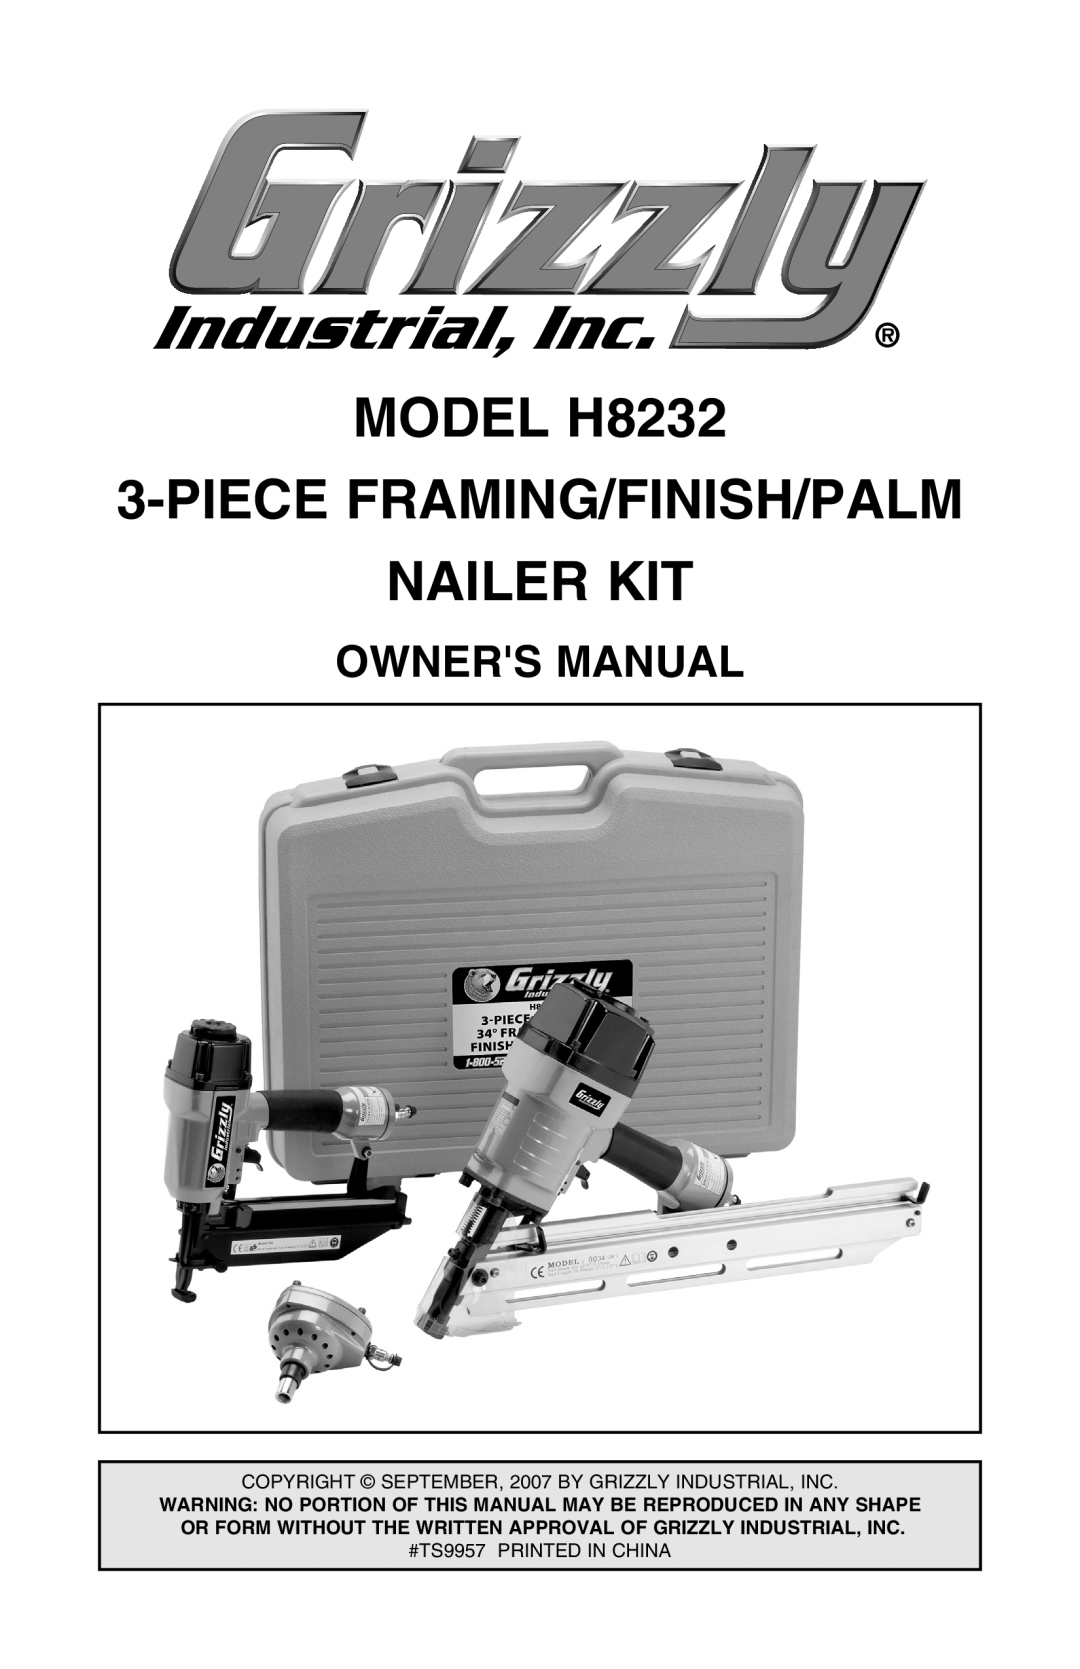 Grizzly owner manual MODEL H8232 3-PIECE FRAMING/FINISH/PALM NAILER KIT, Owners Manual 